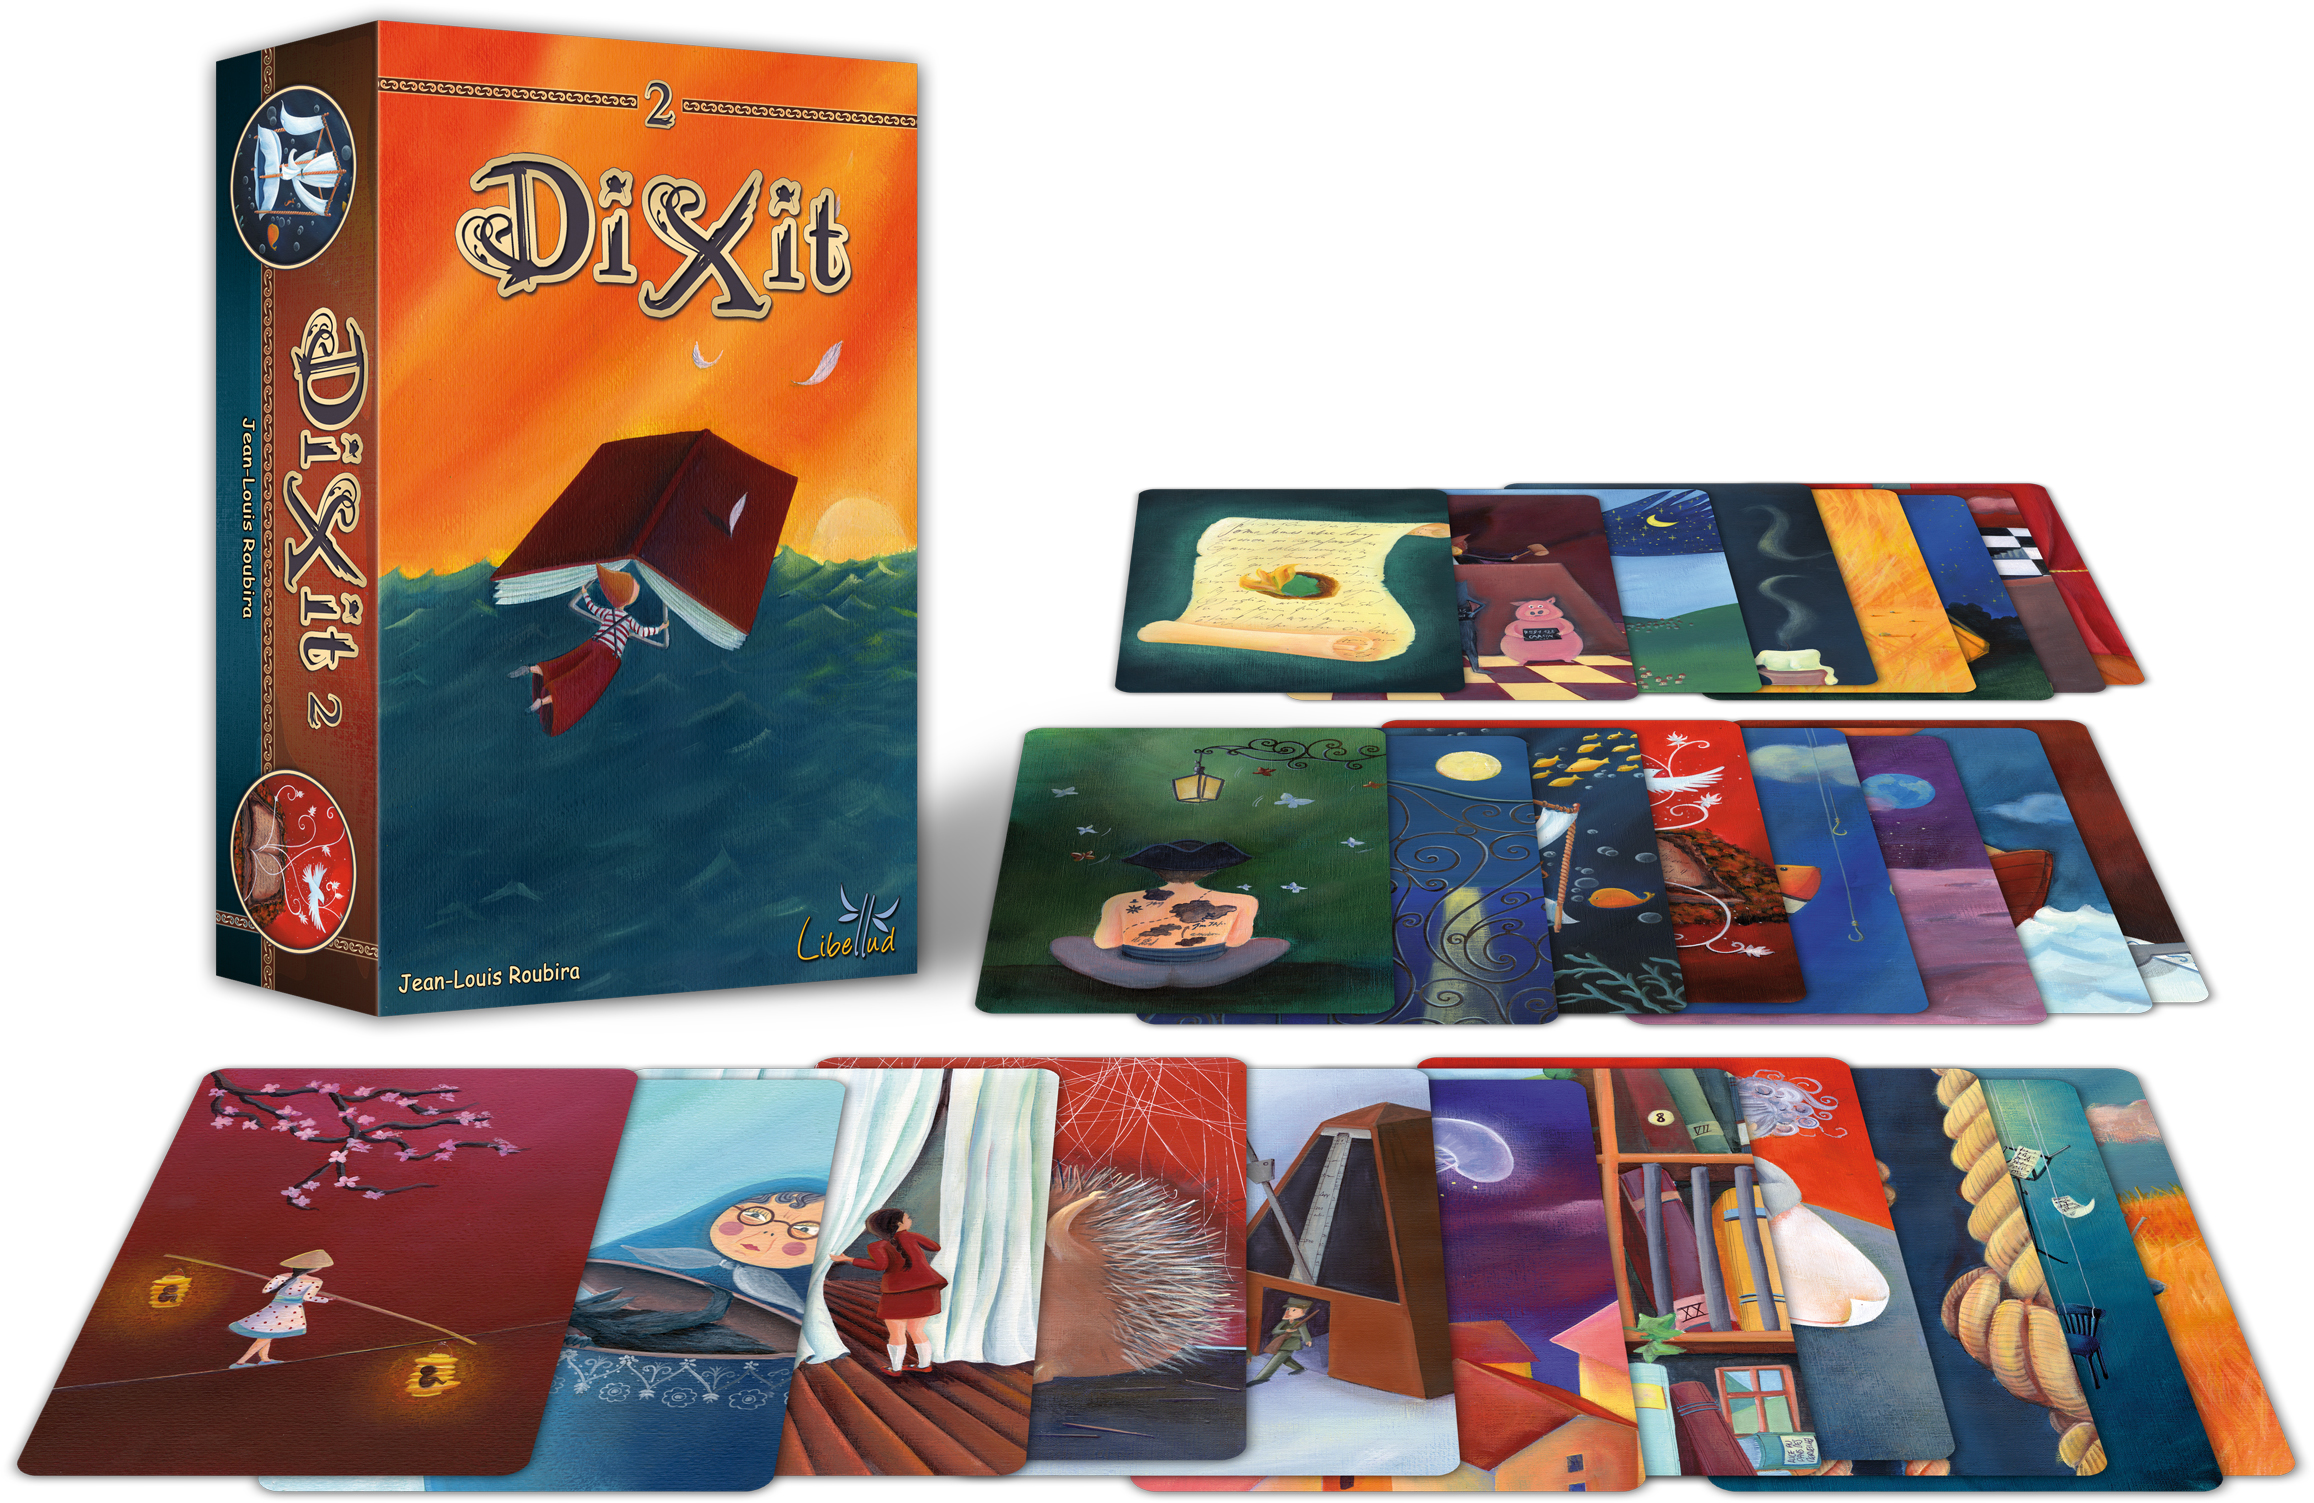 Dixit and a surreal peek into dangerous minds